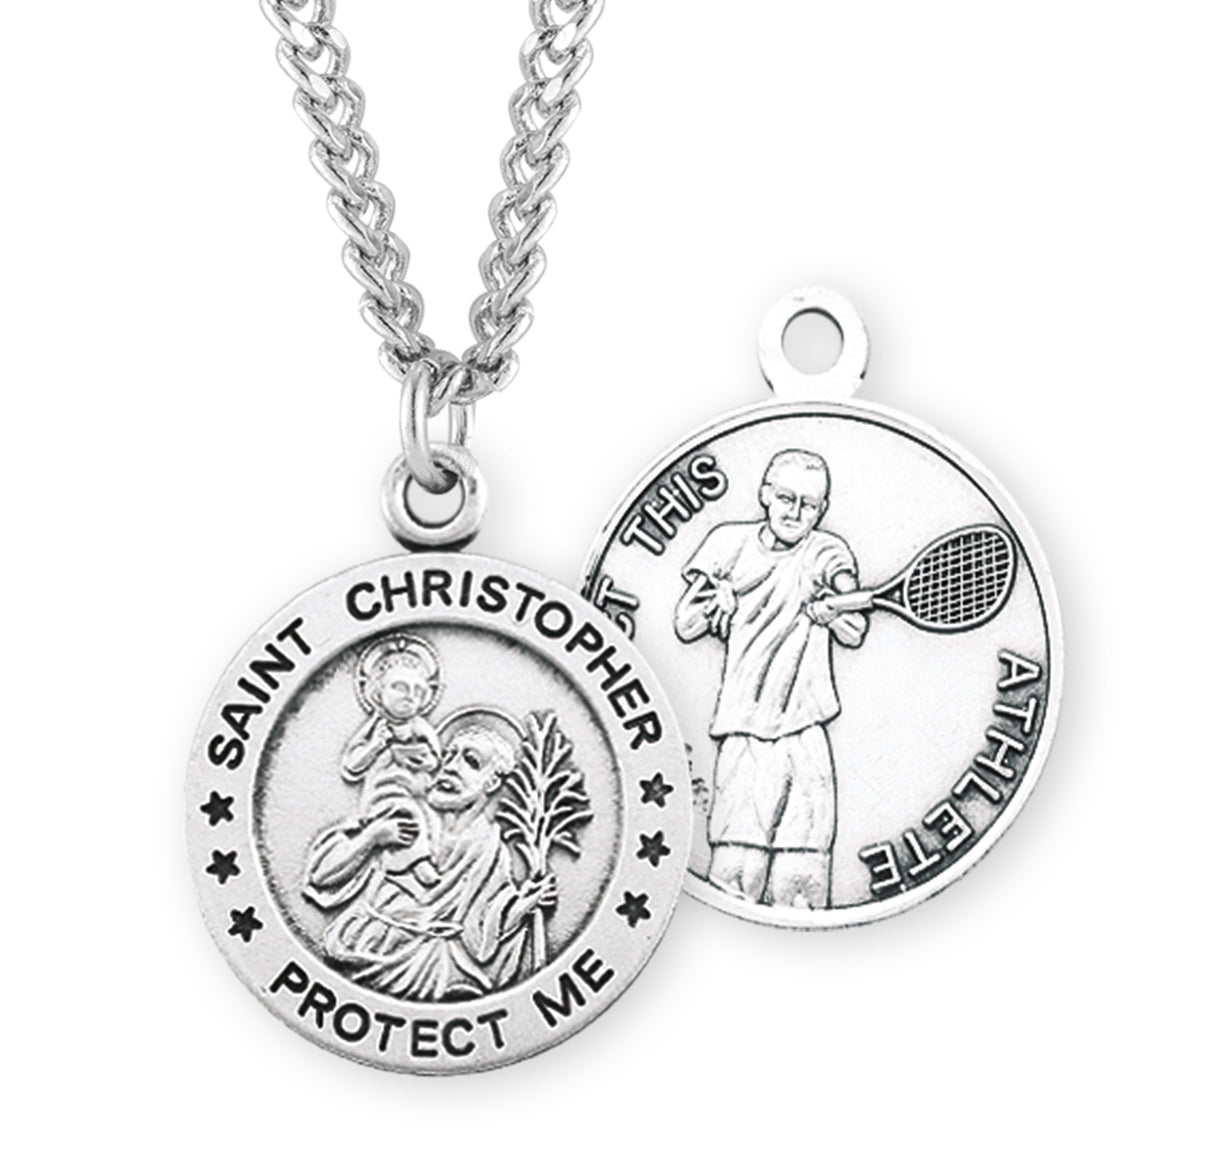 Saint Christopher Round Sterling Silver Tennis Male Athlete Medal